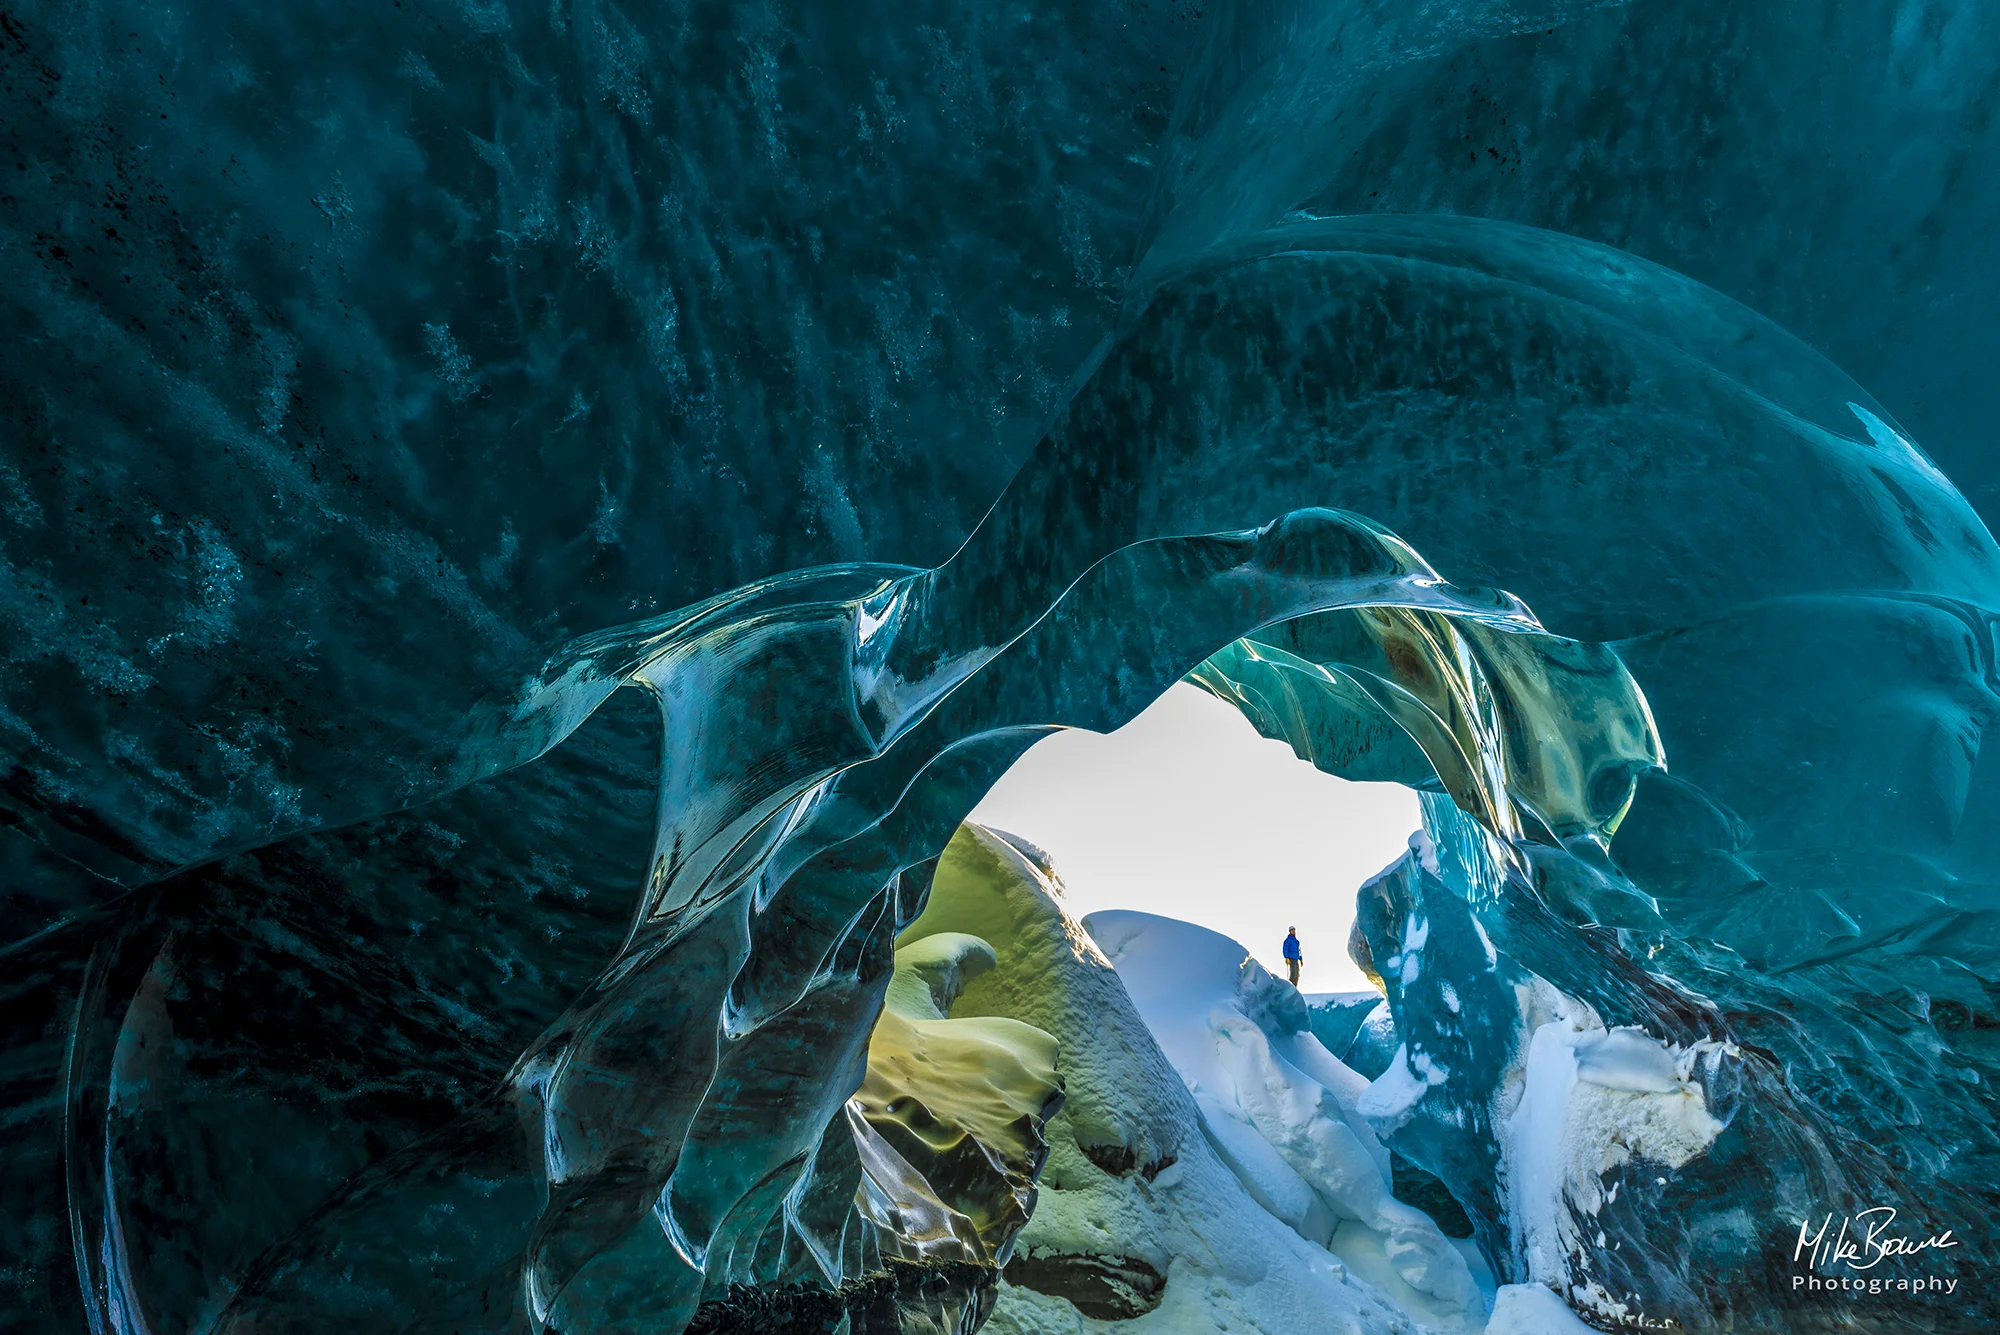 Man standing in entrance to an ice cave in vatnajokull national park Iceland